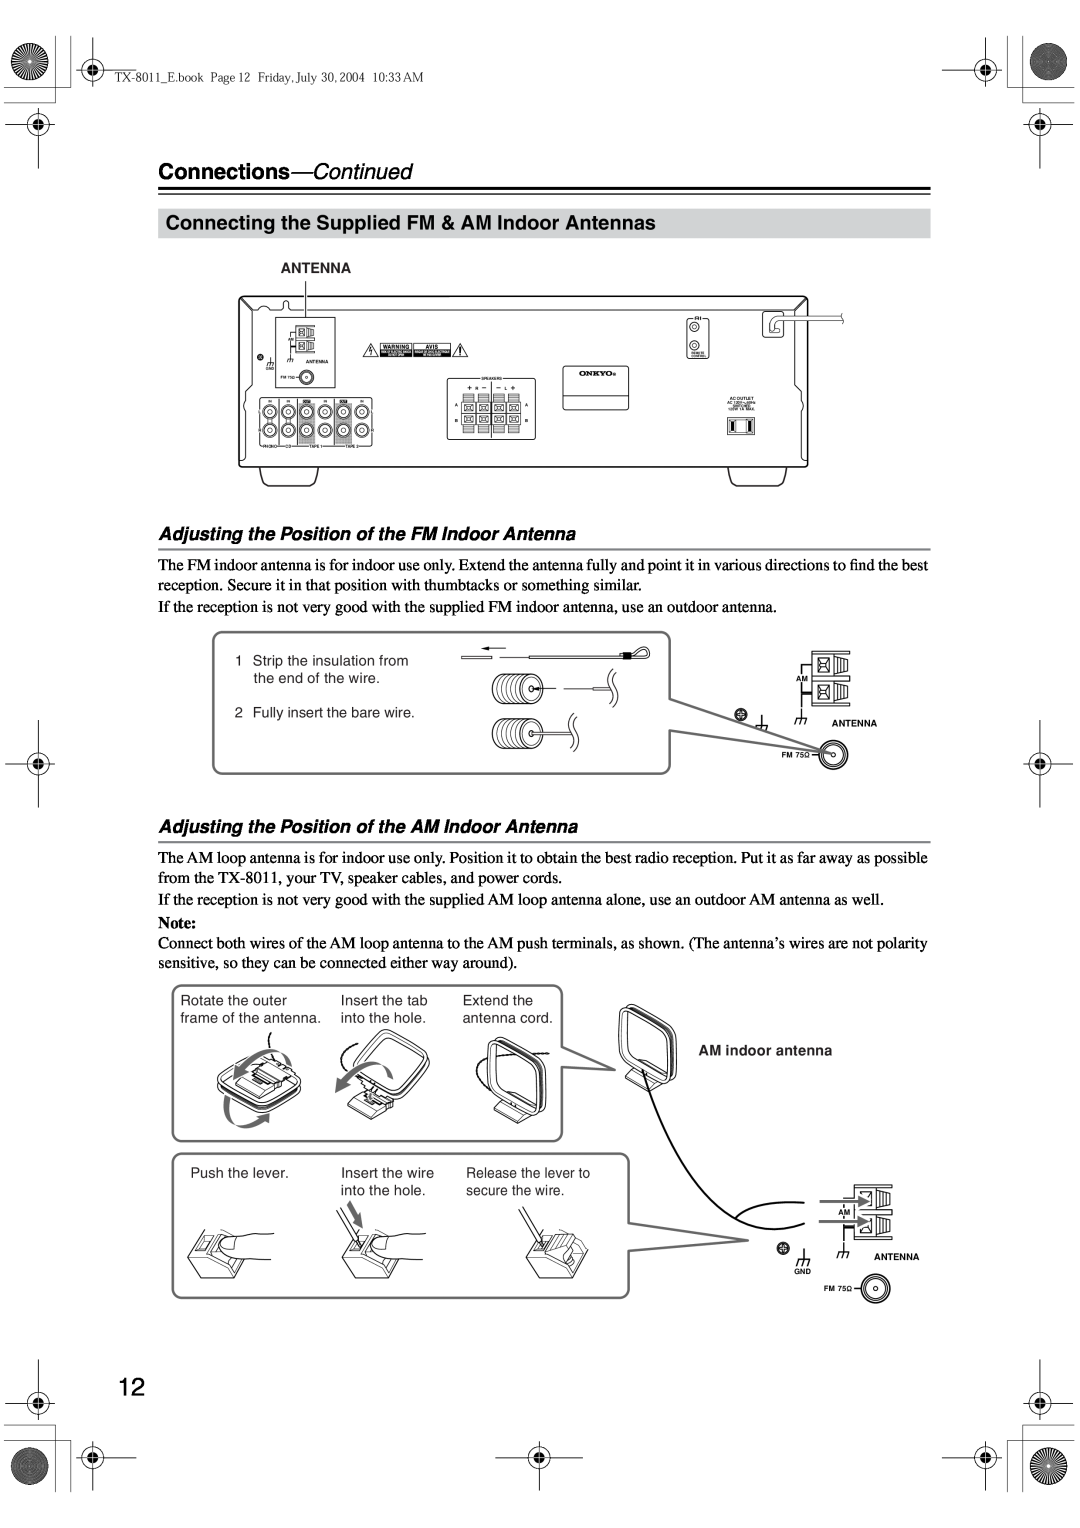 Onkyo TX-8011 instruction manual Connections-Continued, Connecting the Supplied FM & AM Indoor Antennas 